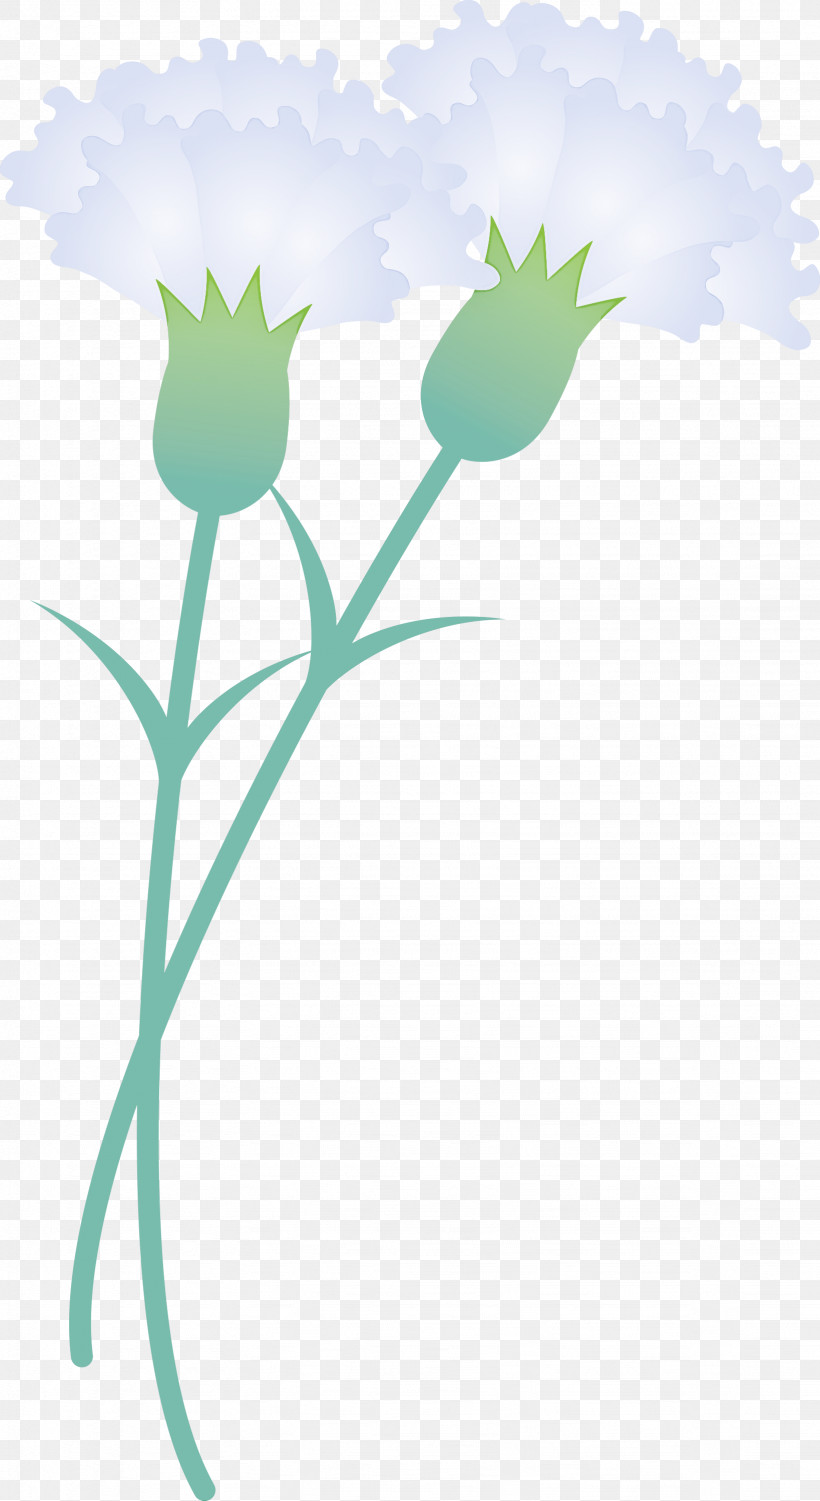 Mothers Day Carnation Mothers Day Flower, PNG, 1638x3000px, Mothers Day Carnation, Flower, Mothers Day Flower, Pedicel, Plant Download Free